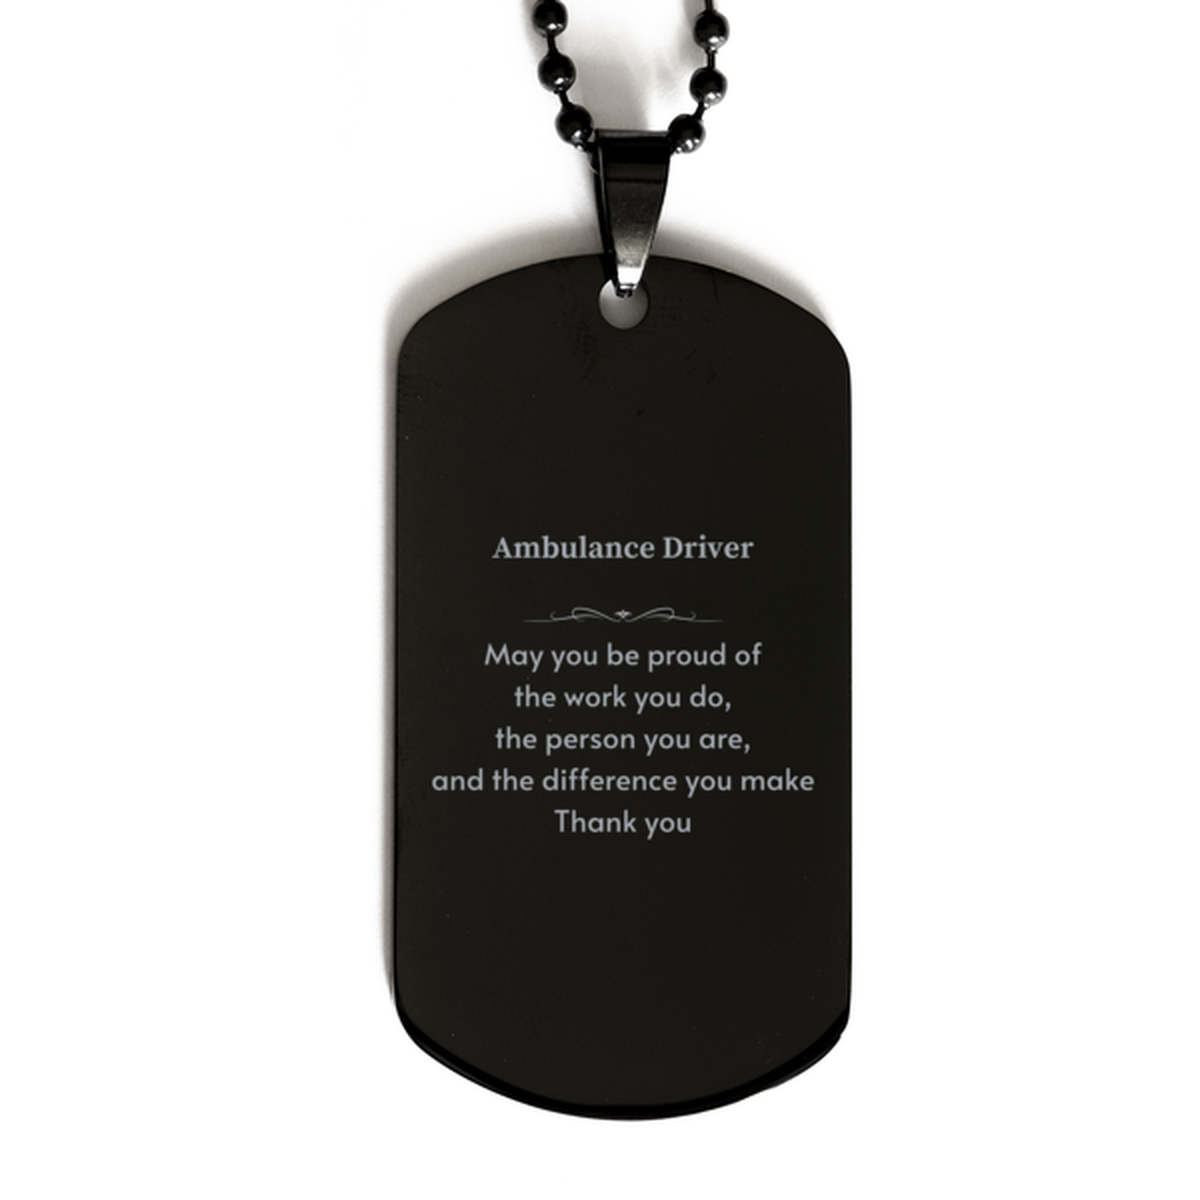 Heartwarming Black Dog Tag Retirement Coworkers Gifts for Ambulance Driver, Ambulance Driver May You be proud of the work you do, the person you are Gifts for Boss Men Women Friends